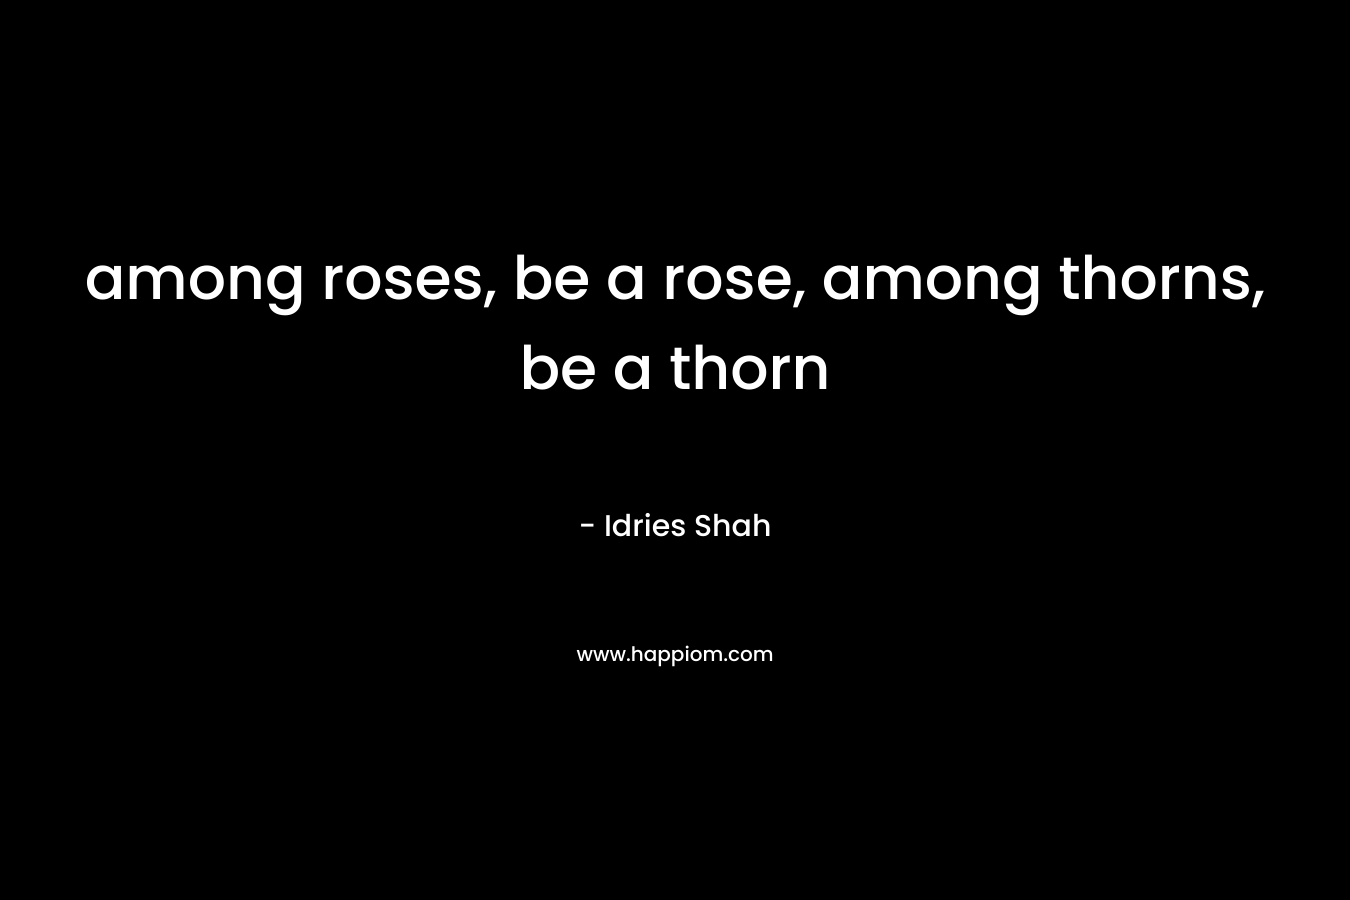 among roses, be a rose, among thorns, be a thorn